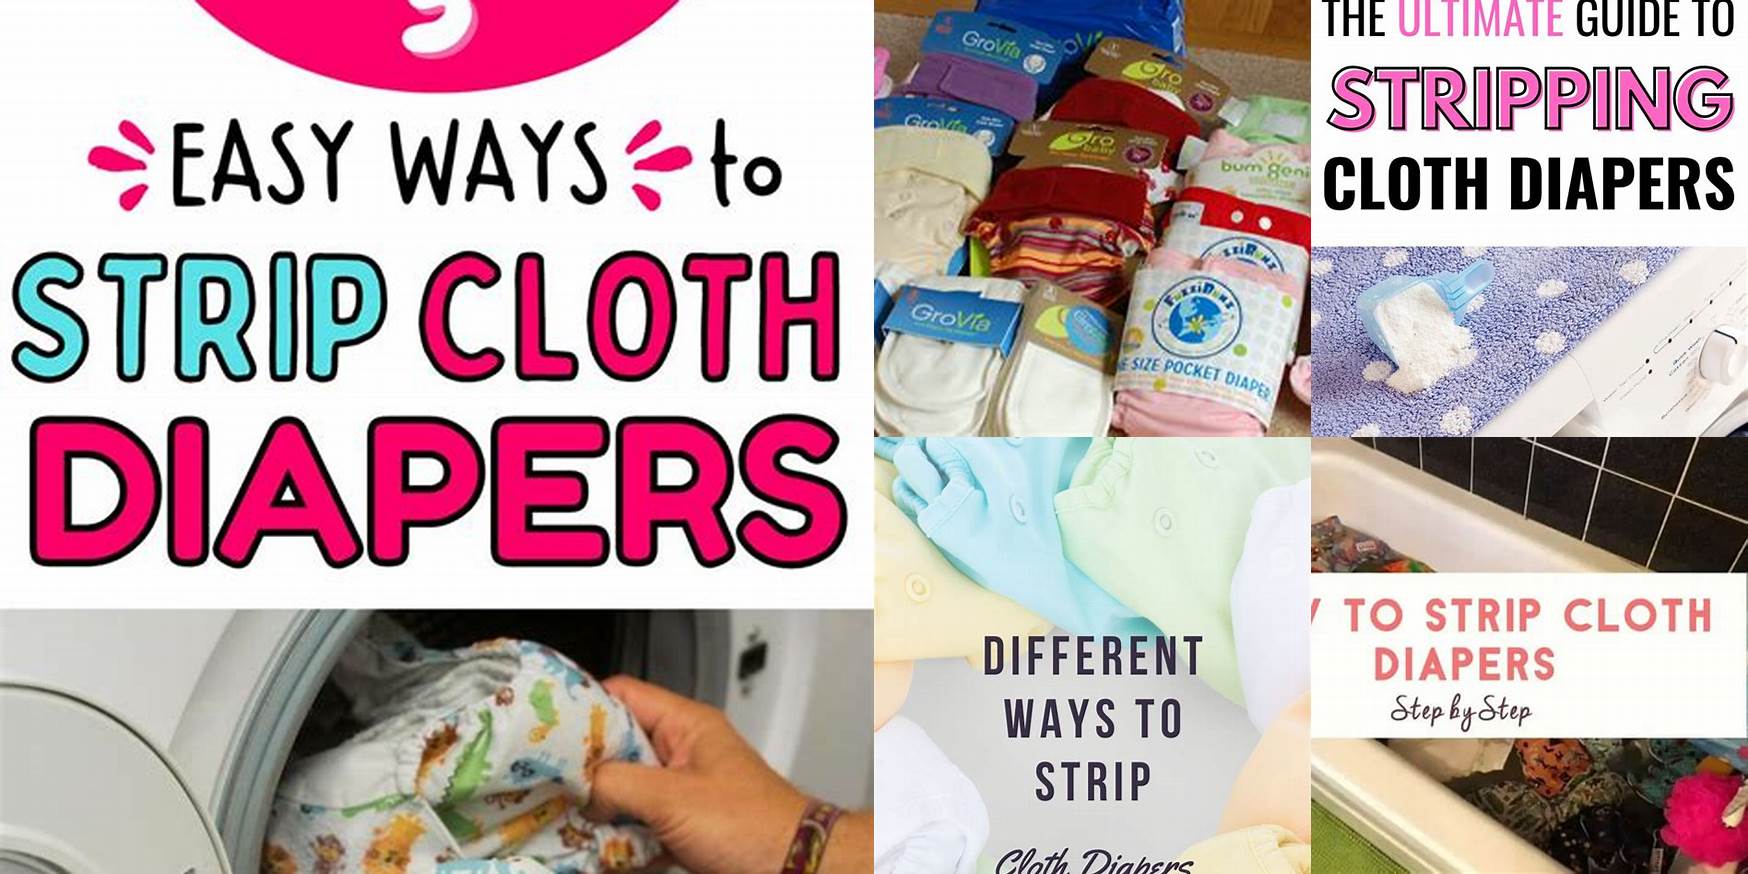 How To Strip Cloth Diapers With Vinegar